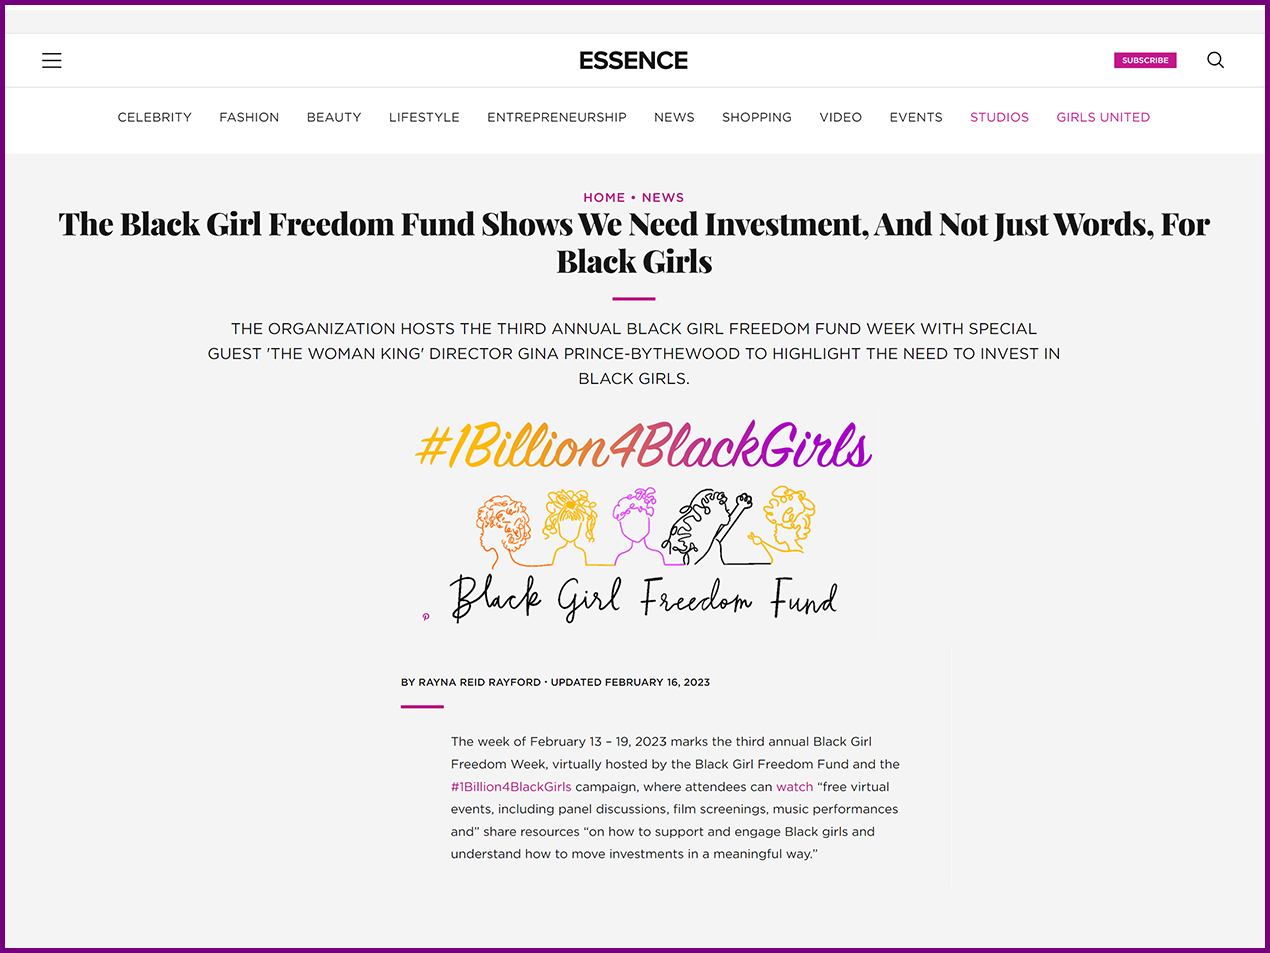 Essence feature: “Black Girl Freedom Fund Shows we need investment, and not just words, for Black girls”